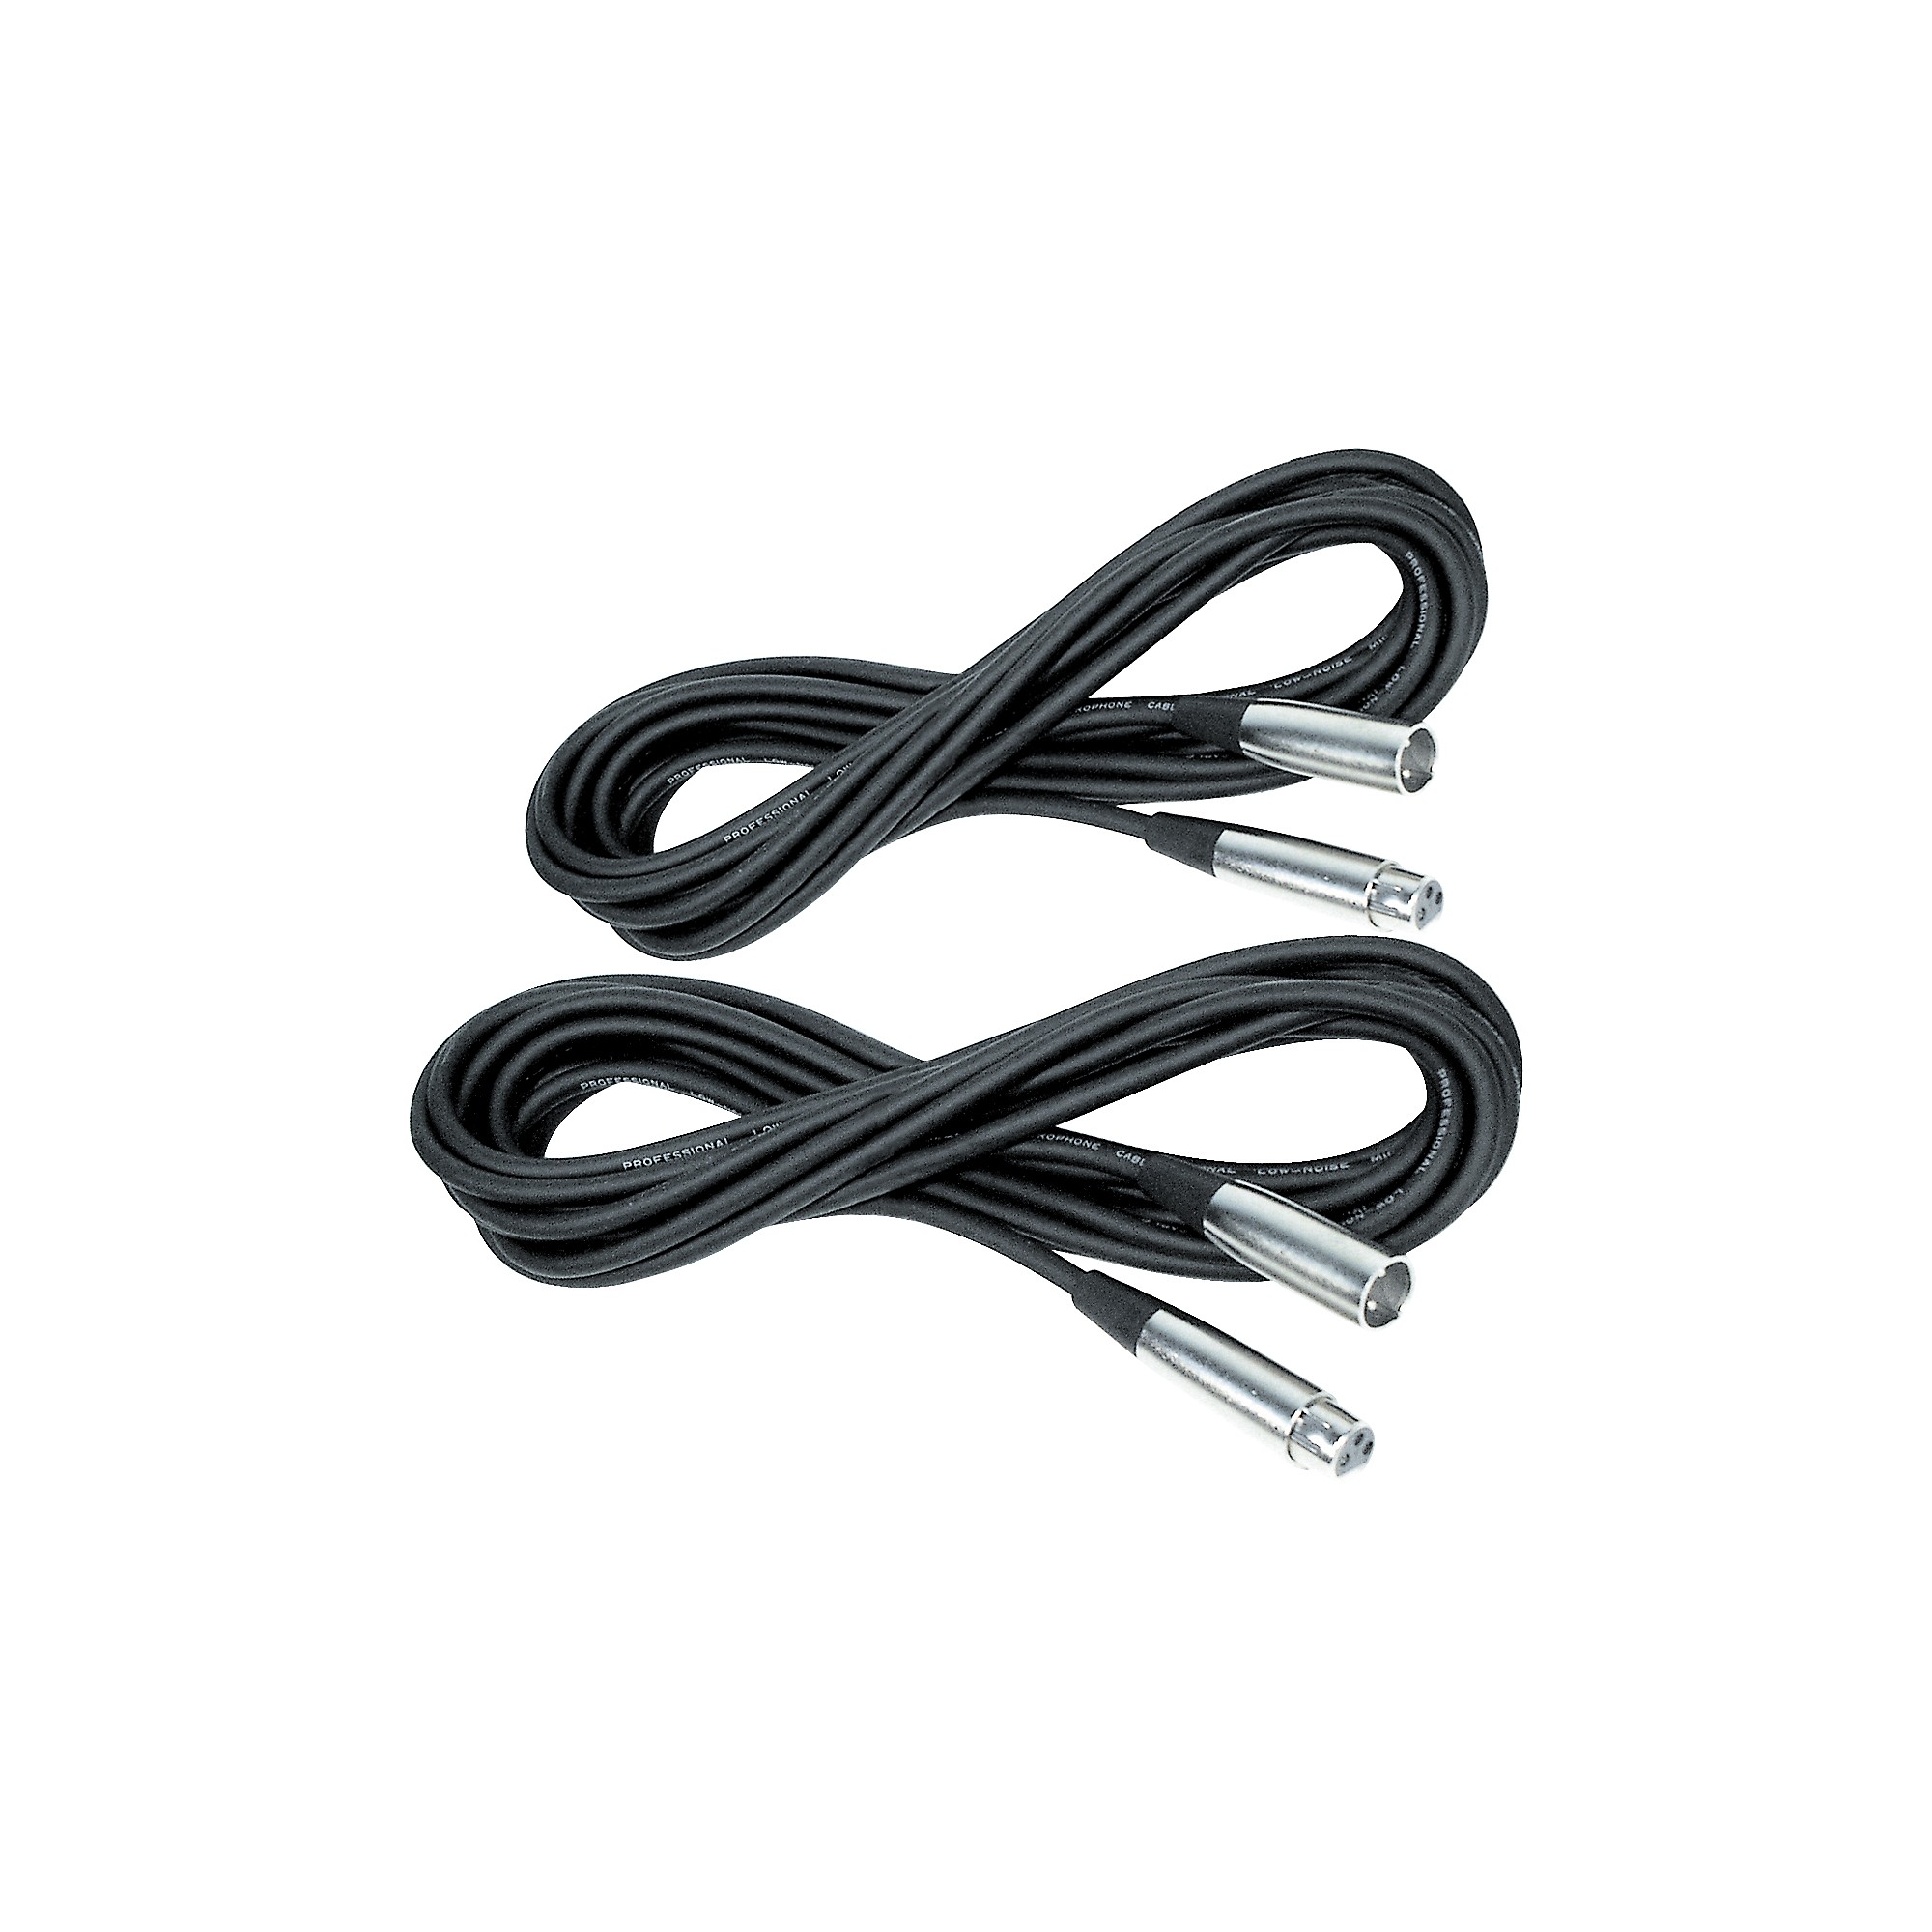 Musician's Gear Lo-Z Mic Cable 20' 2-Pack